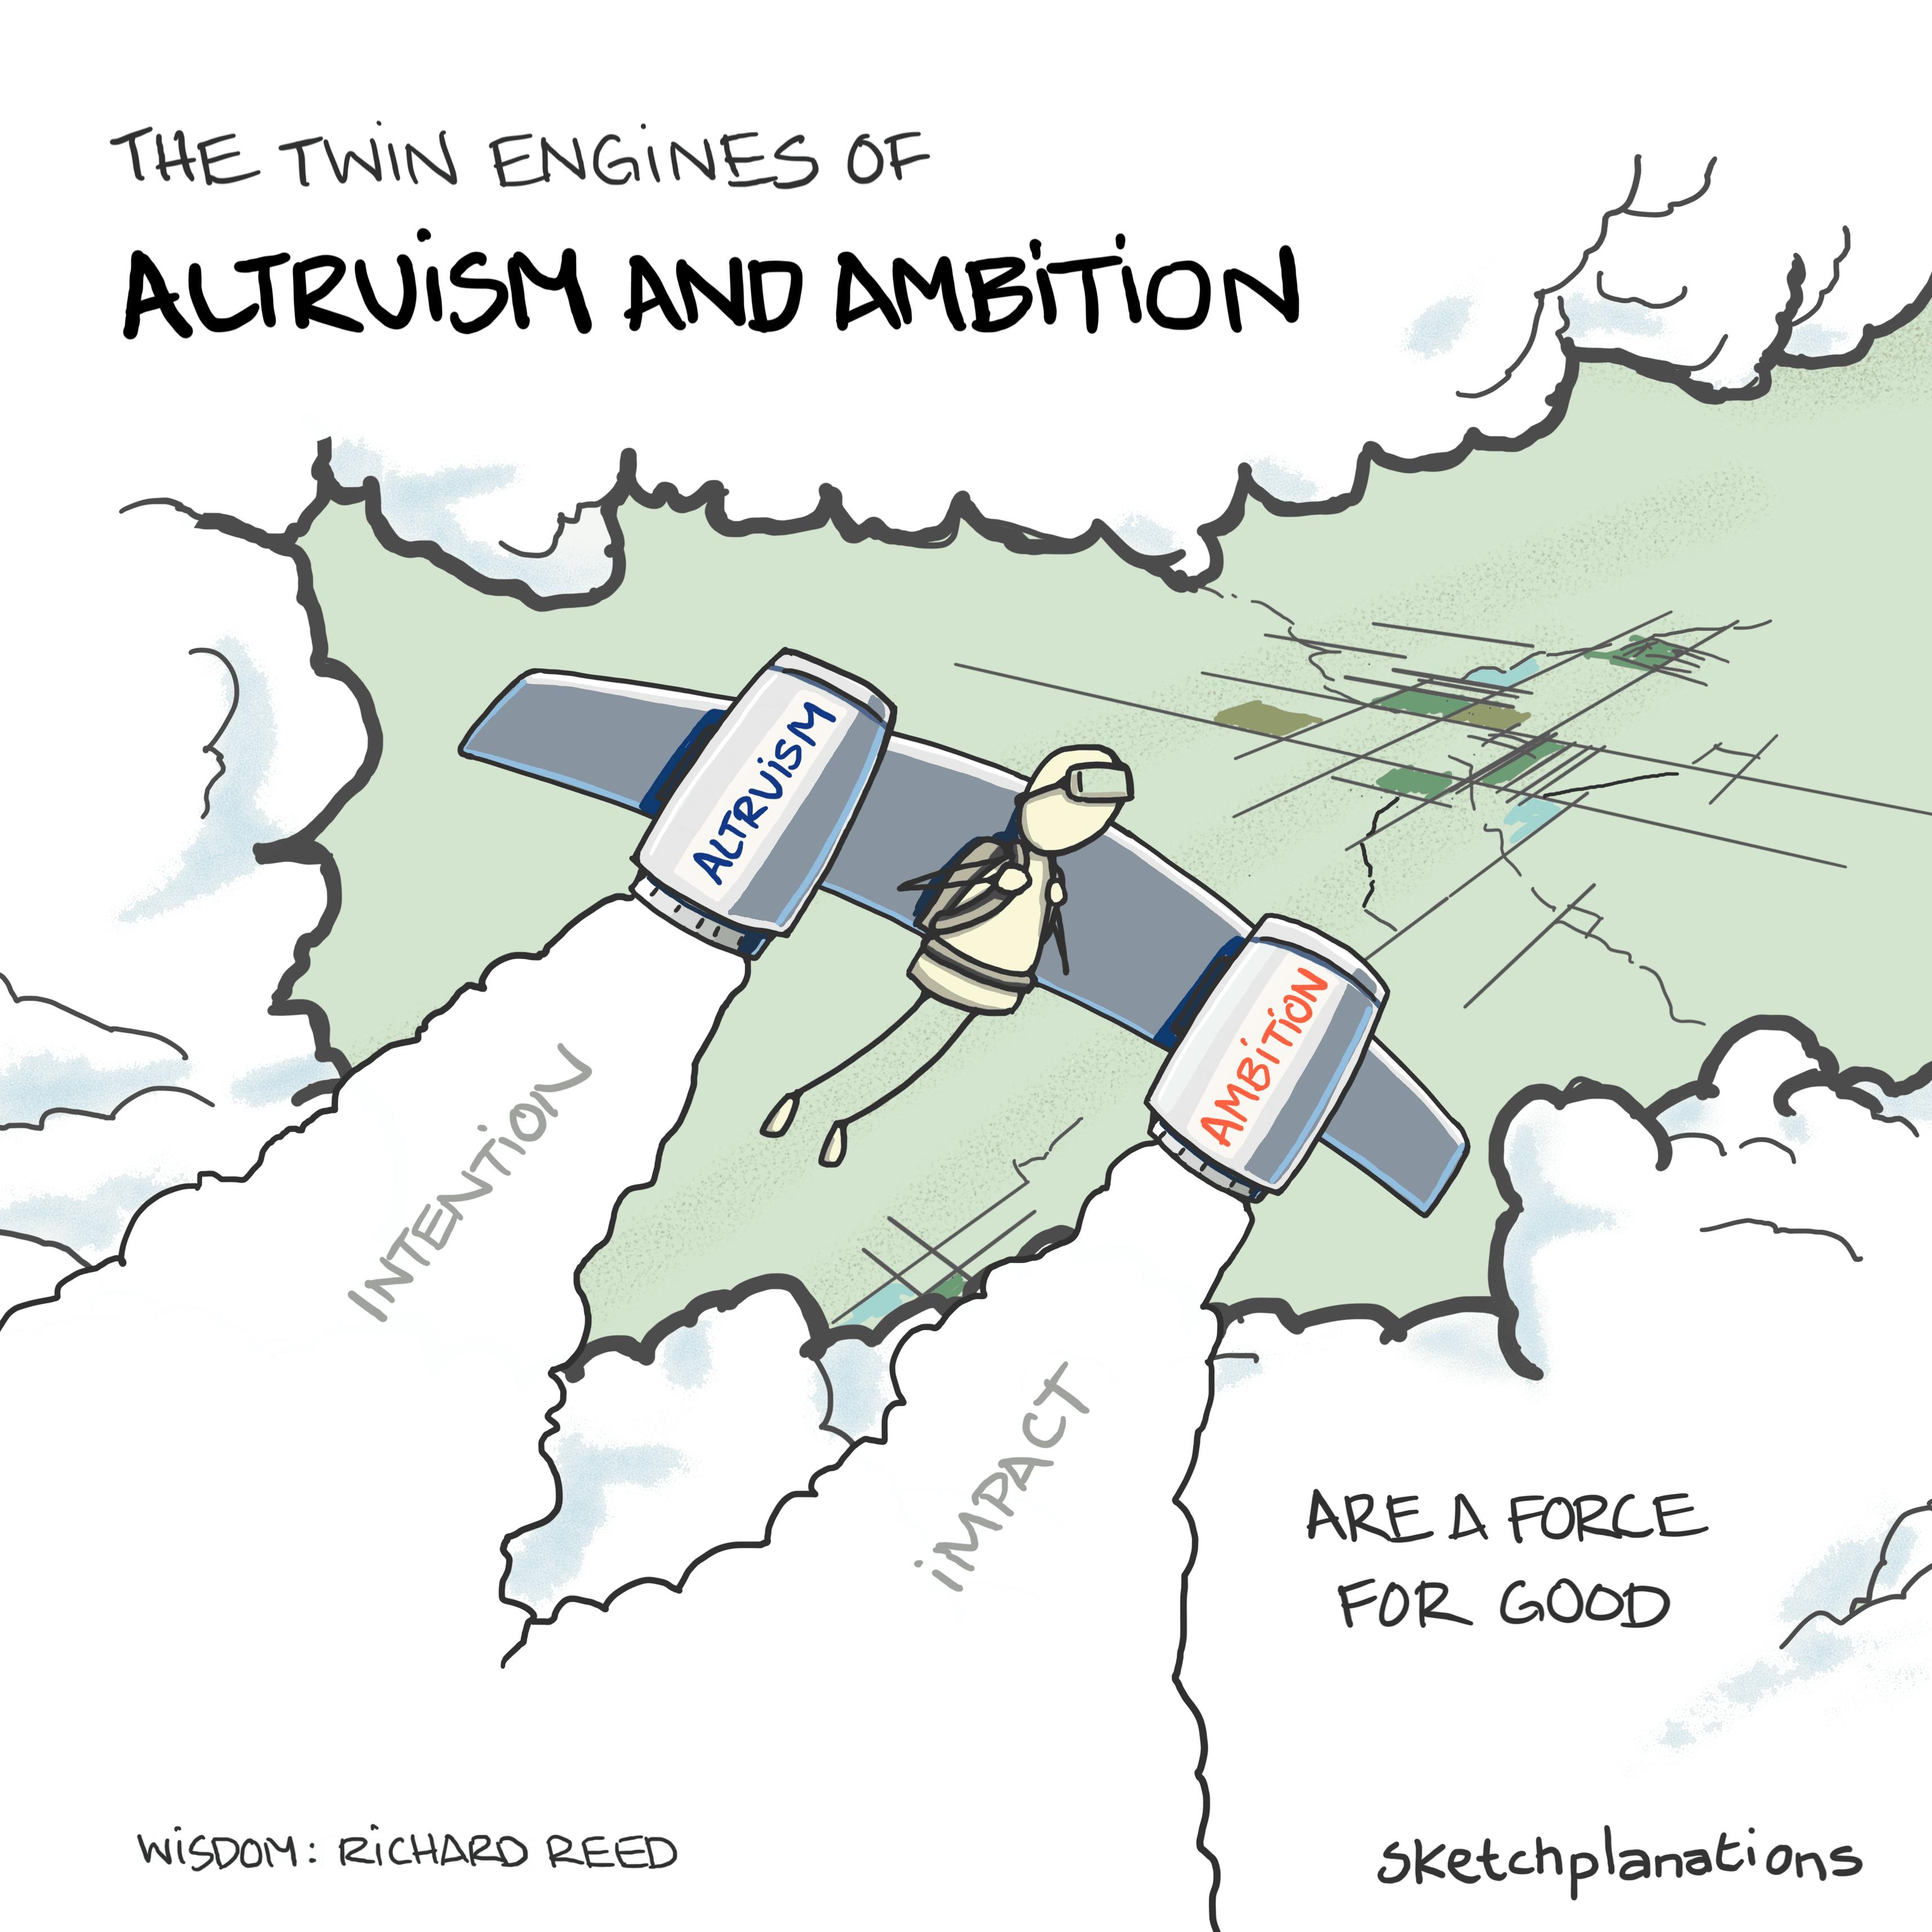 Altruism and Ambition Richard Reed quote illustration: a determined character soars through the clouds miles above the earth below and has a large wing strapped to their back. On the left hand side of the wing is a jet engine labelled "Altruism". On the right hand side is a jet engine labelled "Ambition". 